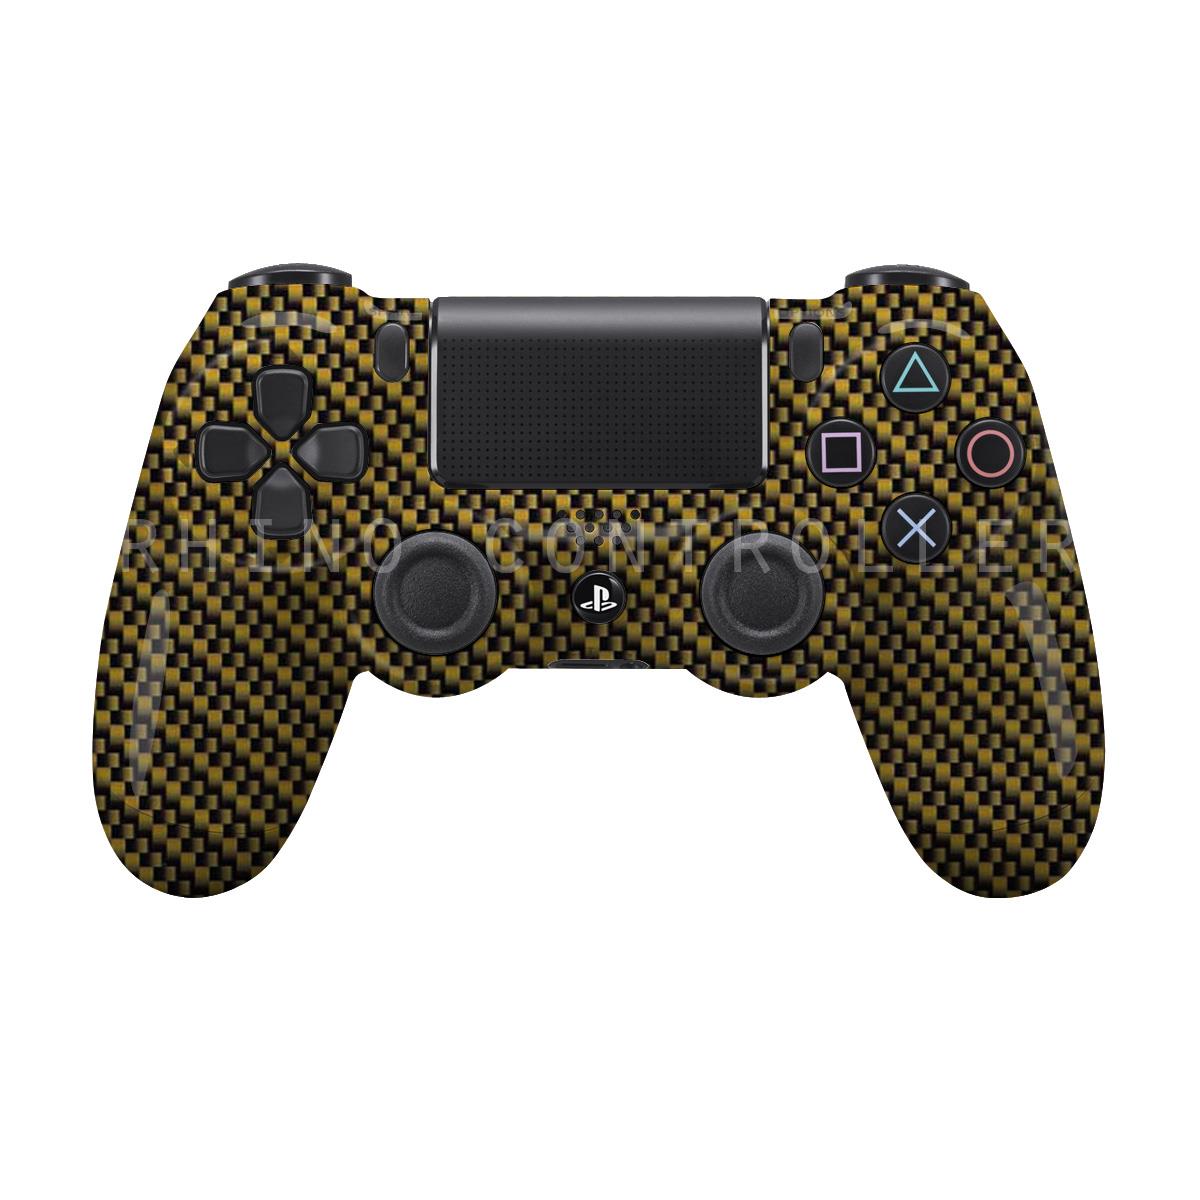 PS4 controller  Wireless Glossy  WTP 214 Carbon Fiber Yellow Black Custom Painted  Without Mods